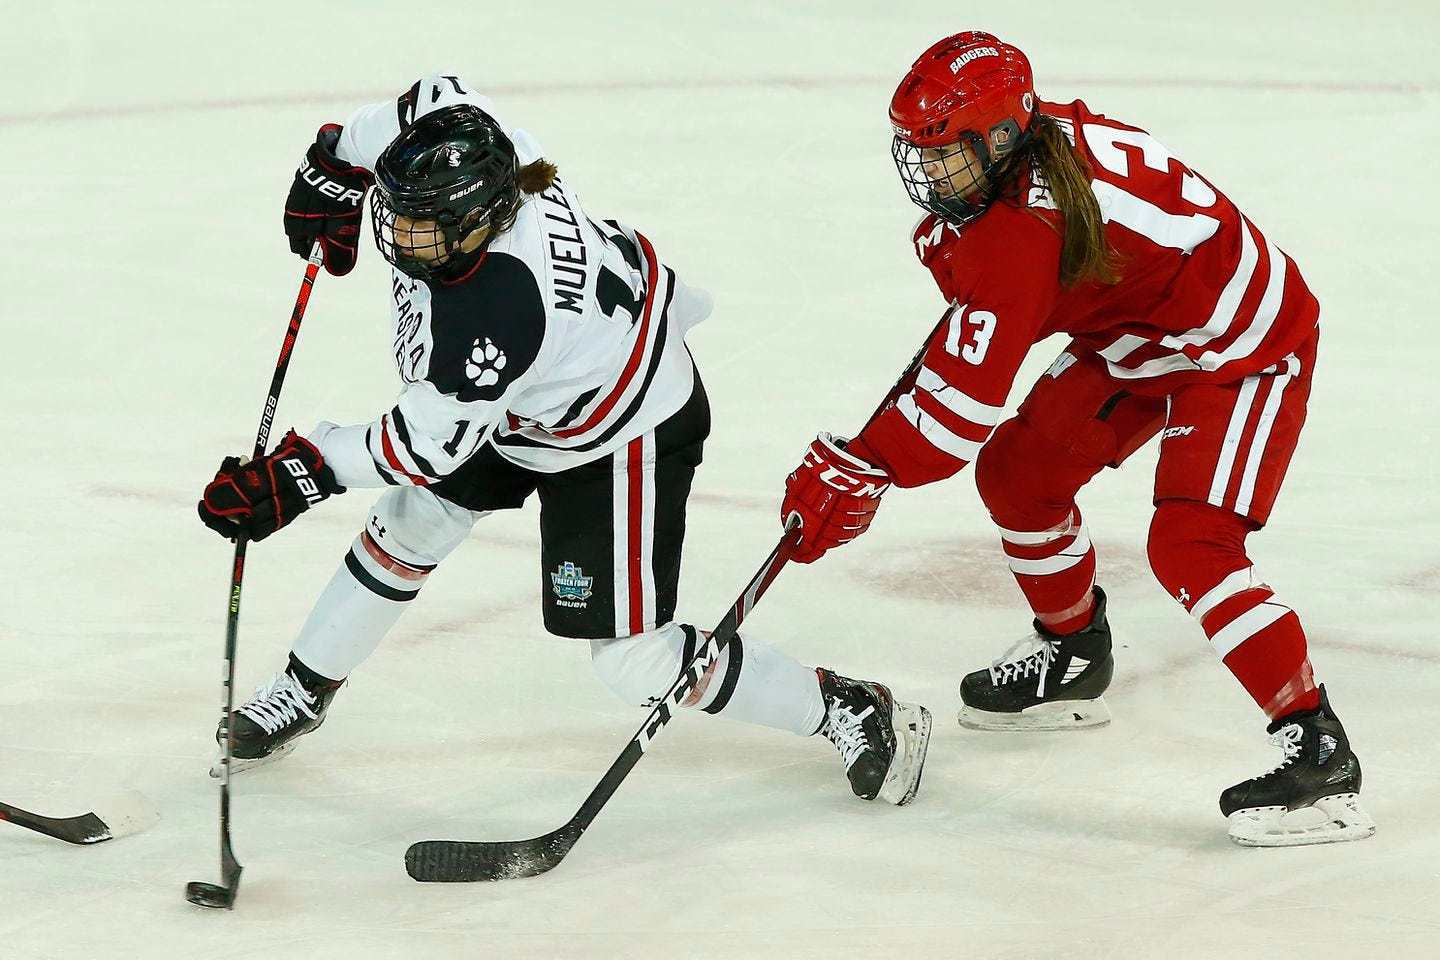 Northeastern's Alina Mueller takes a shot in front of Wisconsin's Grace Bowlby in the women's Frozen Four NCAA championship game in Erie, Pa.